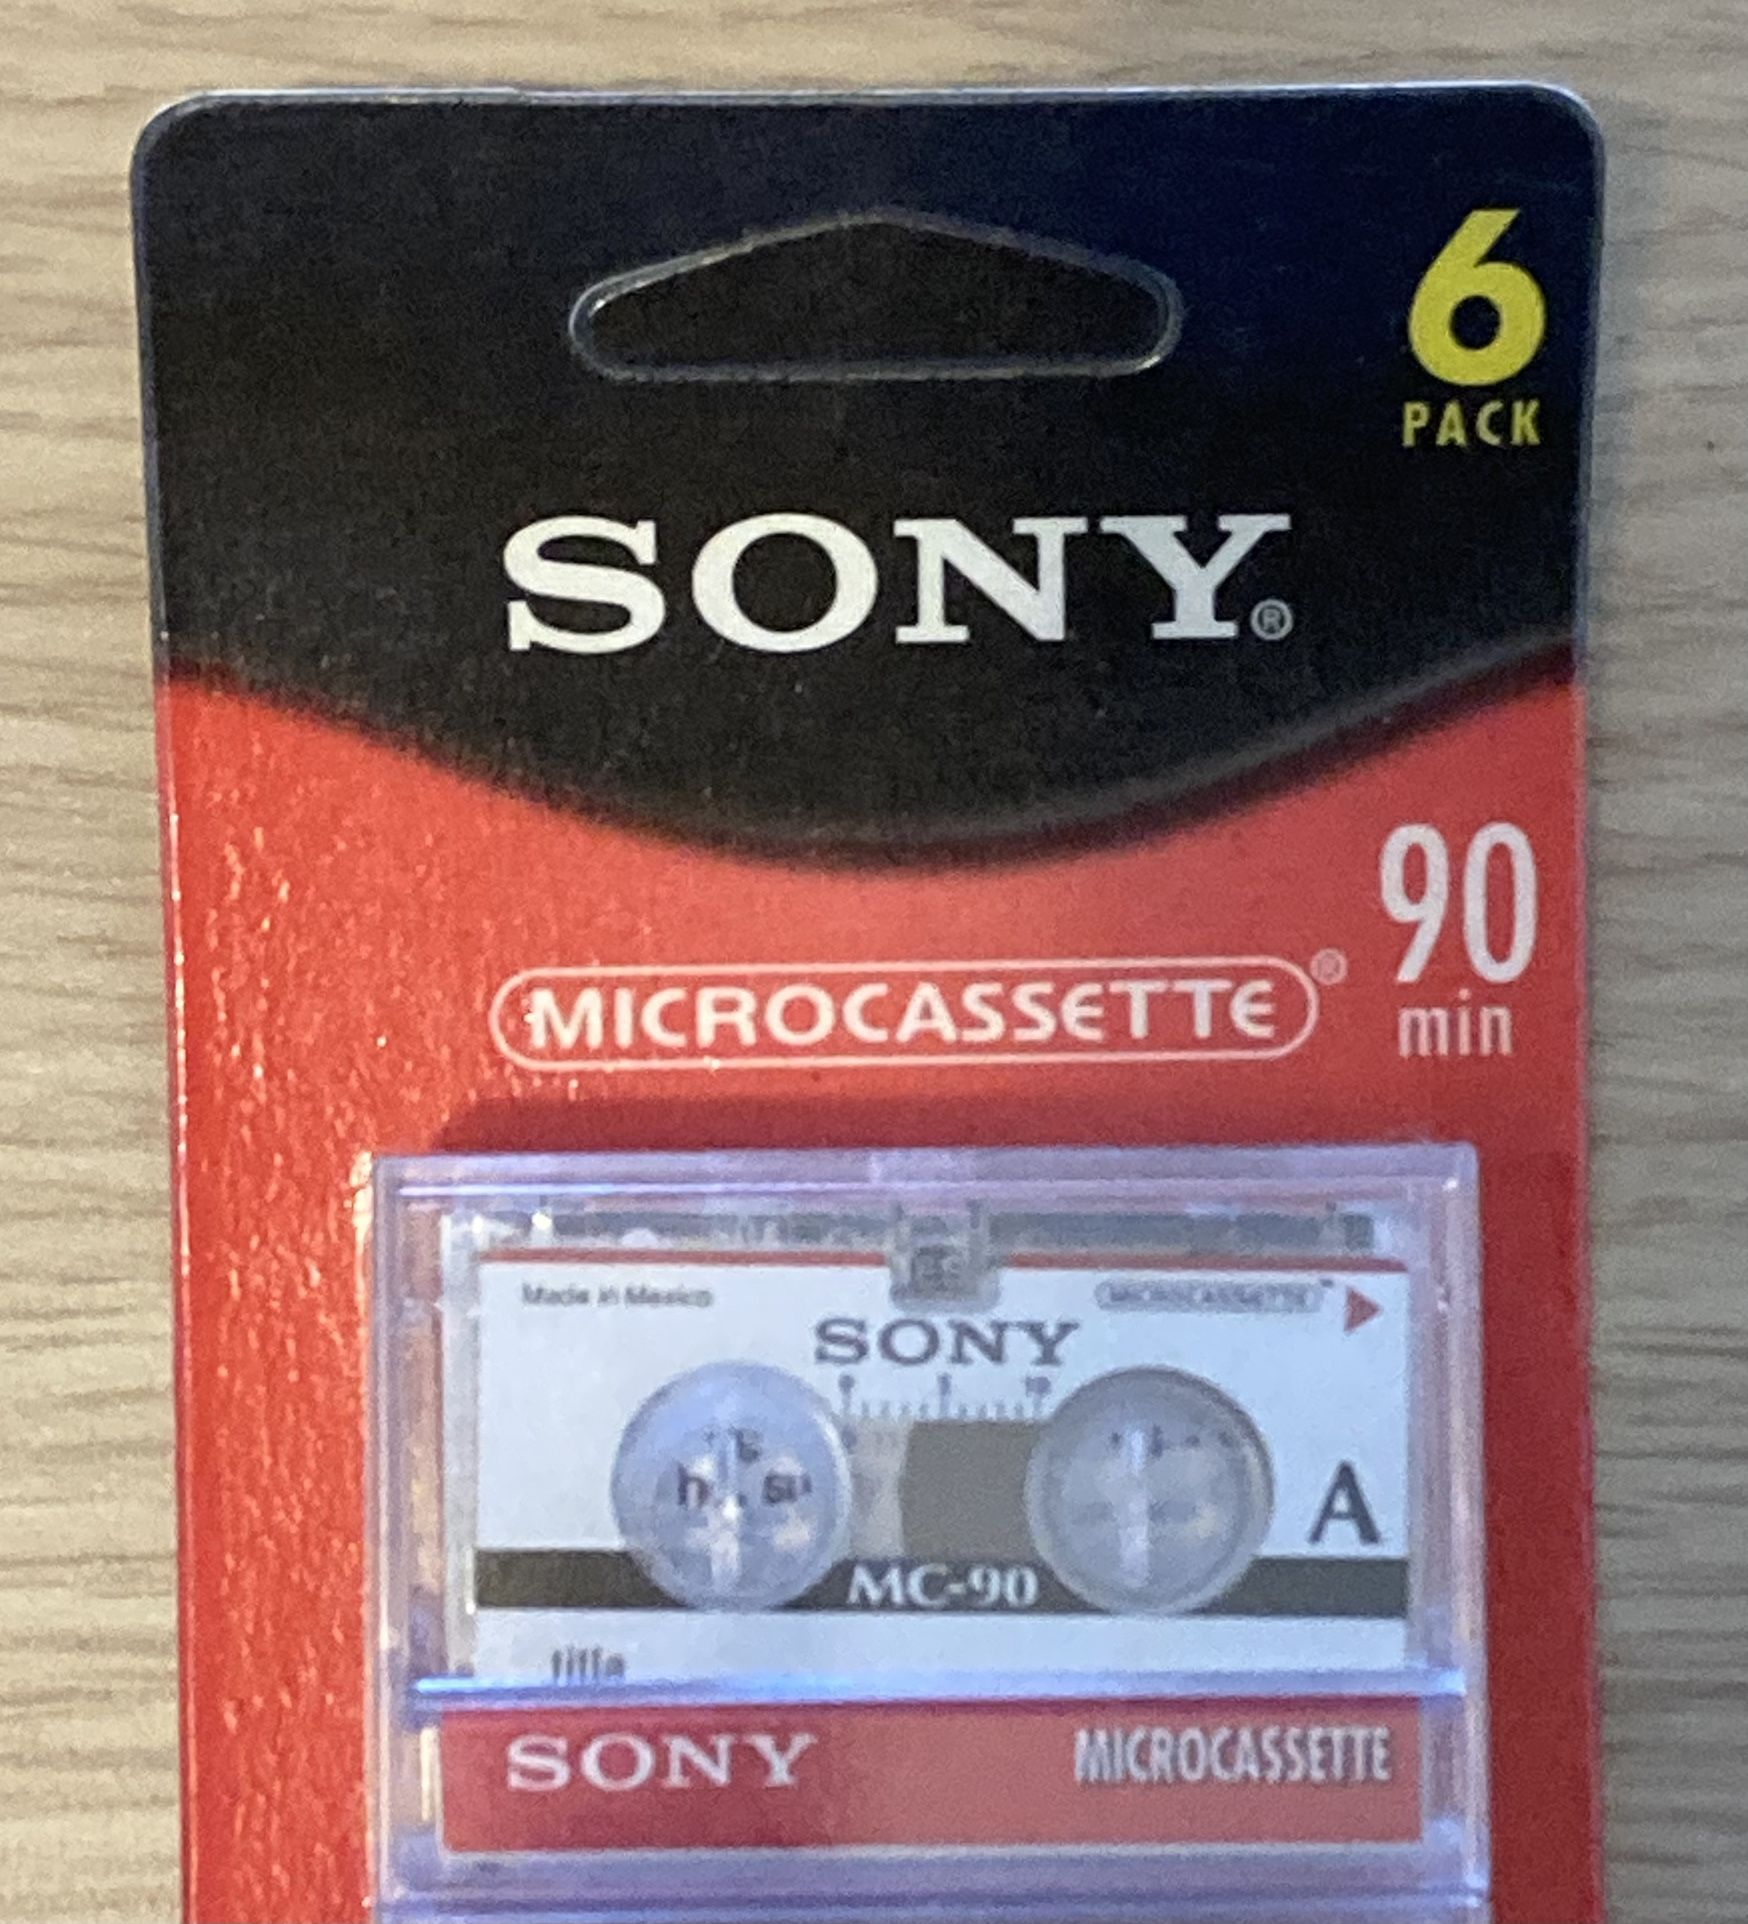 New Sony Microcassette Tapes 90 Minutes 6 Pack